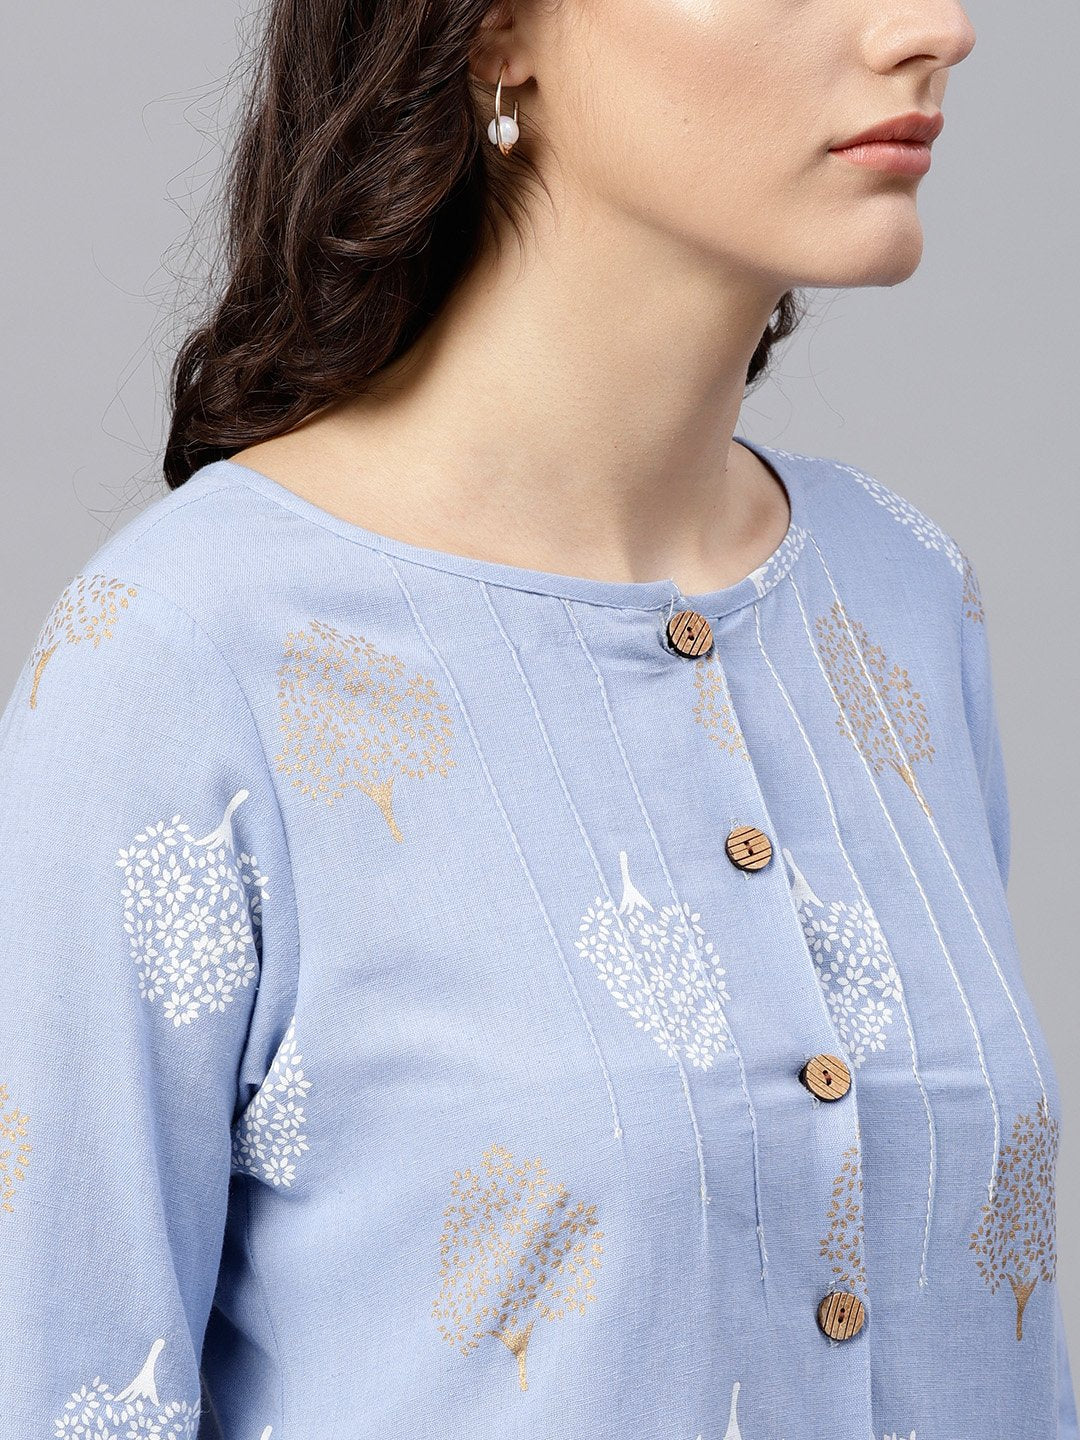 Women's Round Neck Light Blue Printed Tunic With Front Placket And 3/4 Sleeves - Nayo Clothing